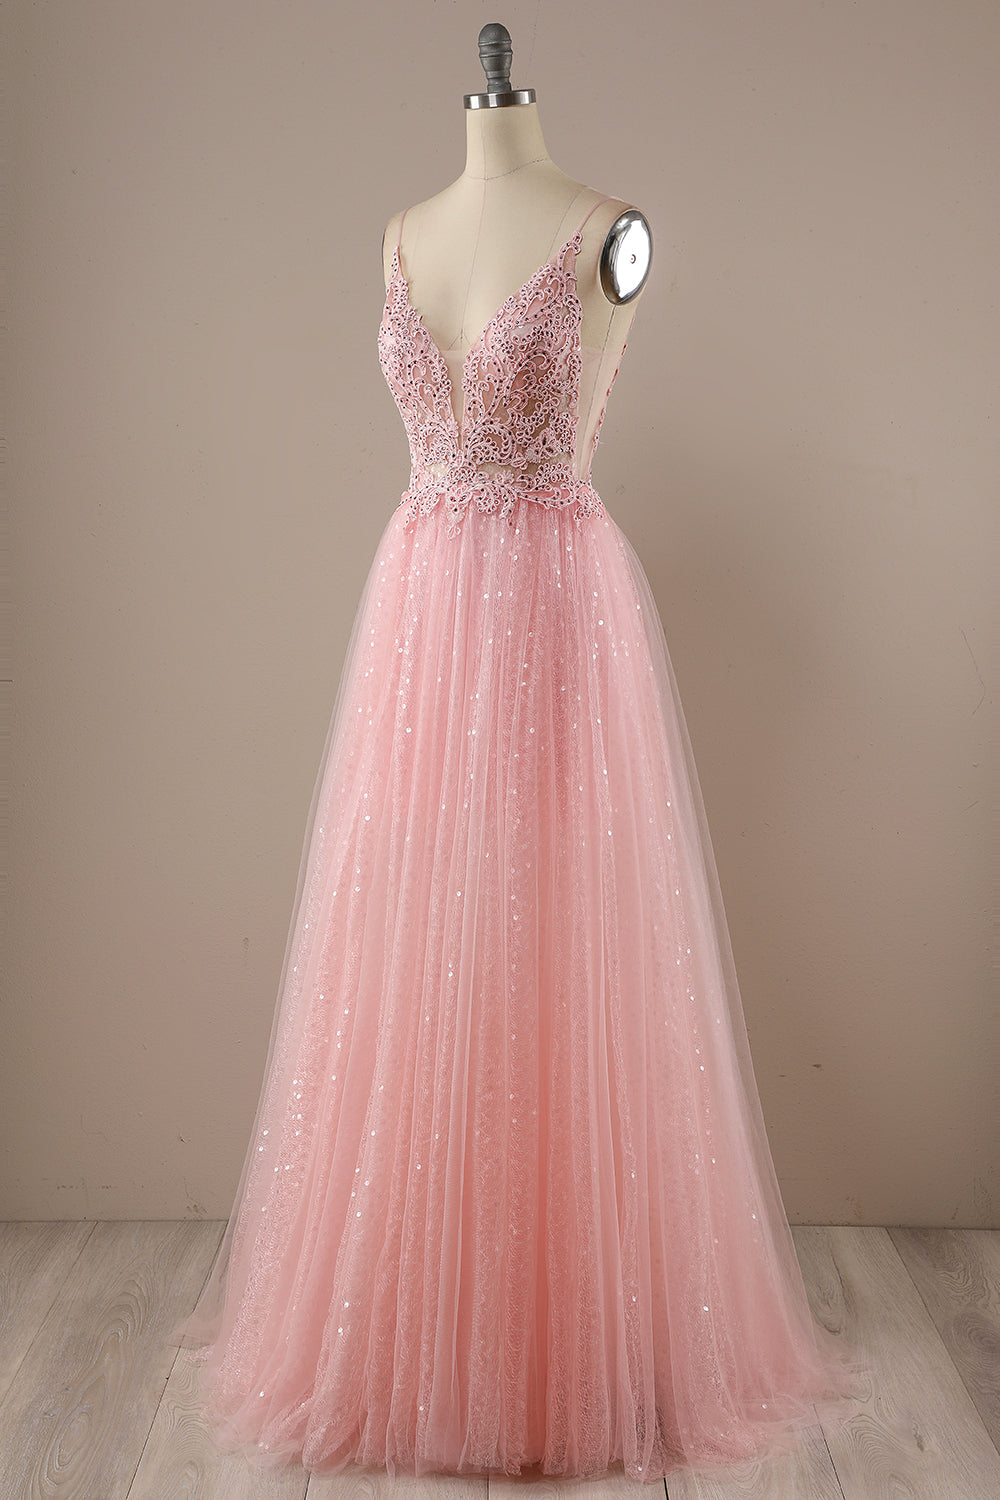 Pink A Line Spaghetti Straps Long Prom Party Dress With Sequins